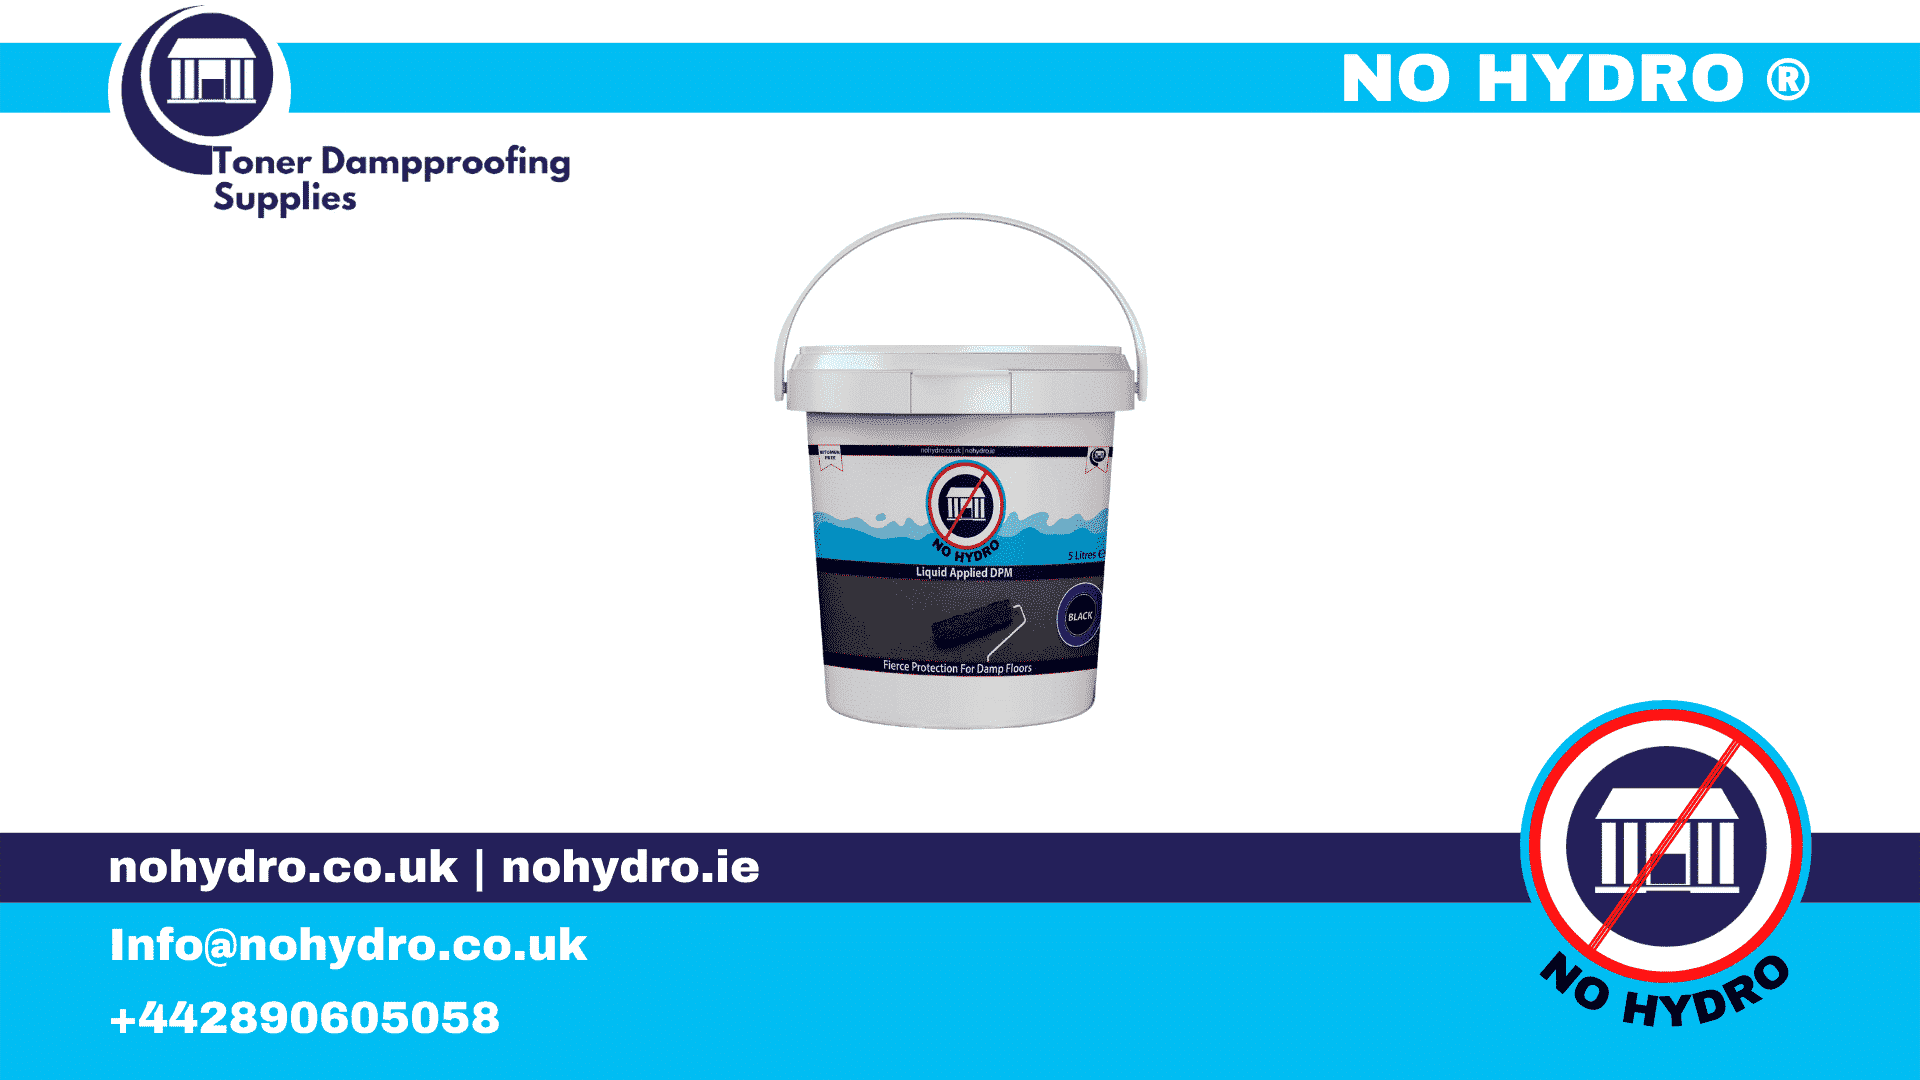 Where can I buy No Hydro Liquid Applied Damp Proof Membrane DPM?